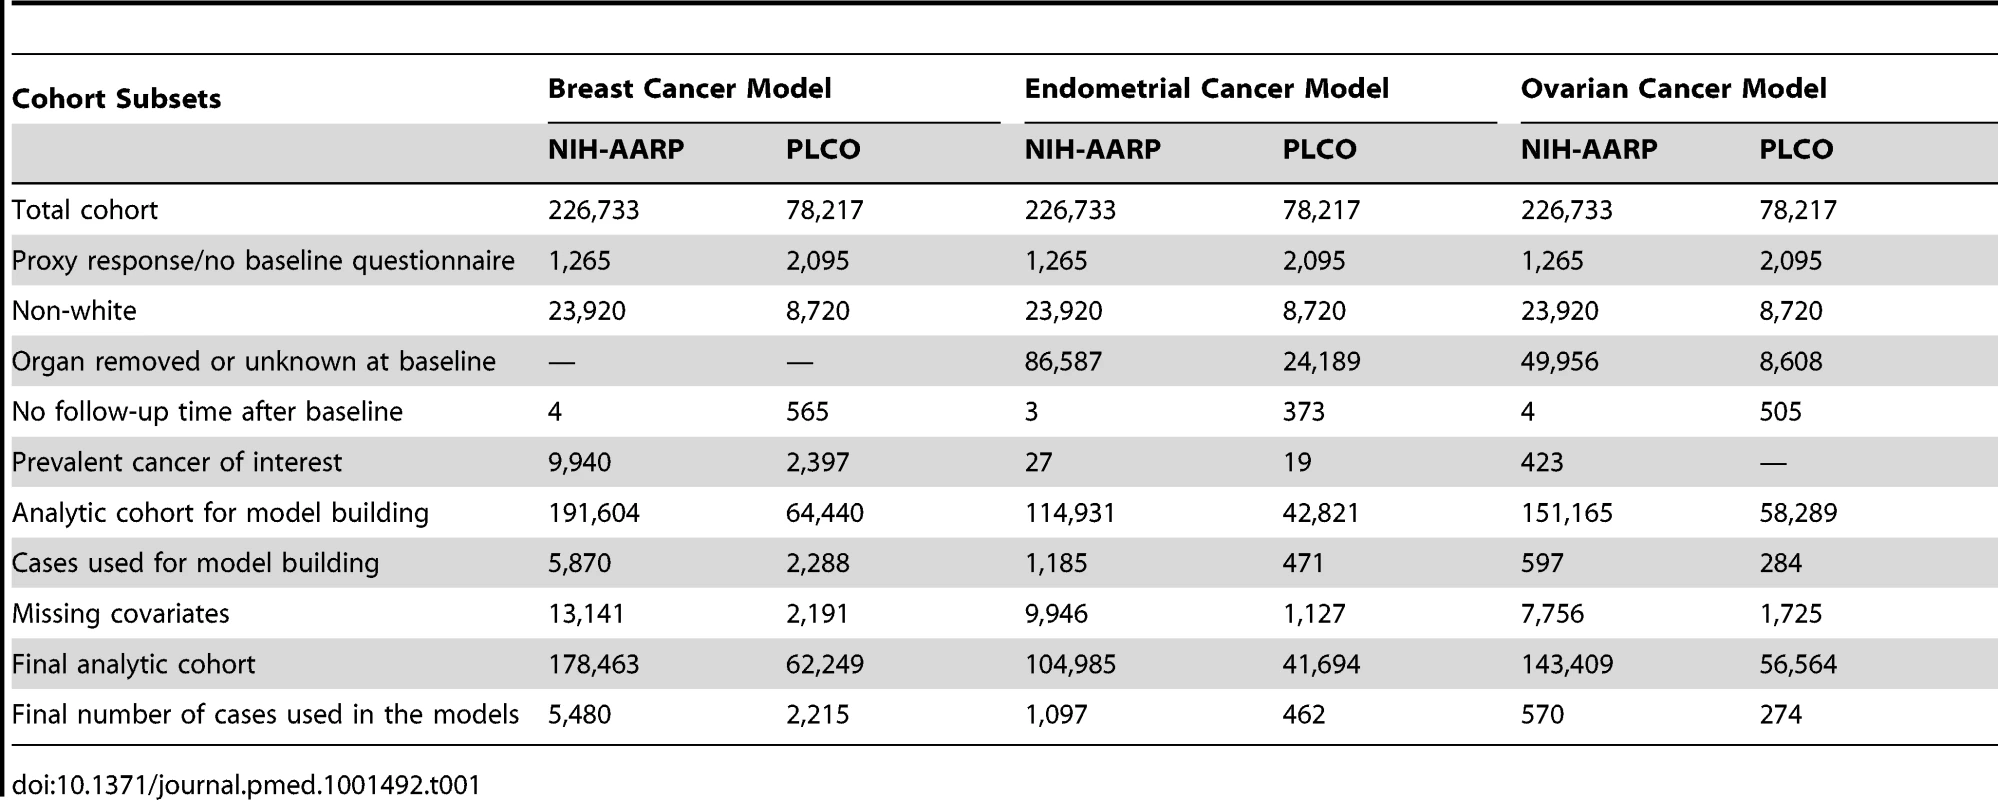 Study populations and exclusions for model development: NIH-AARP and PLCO cohorts at baseline.